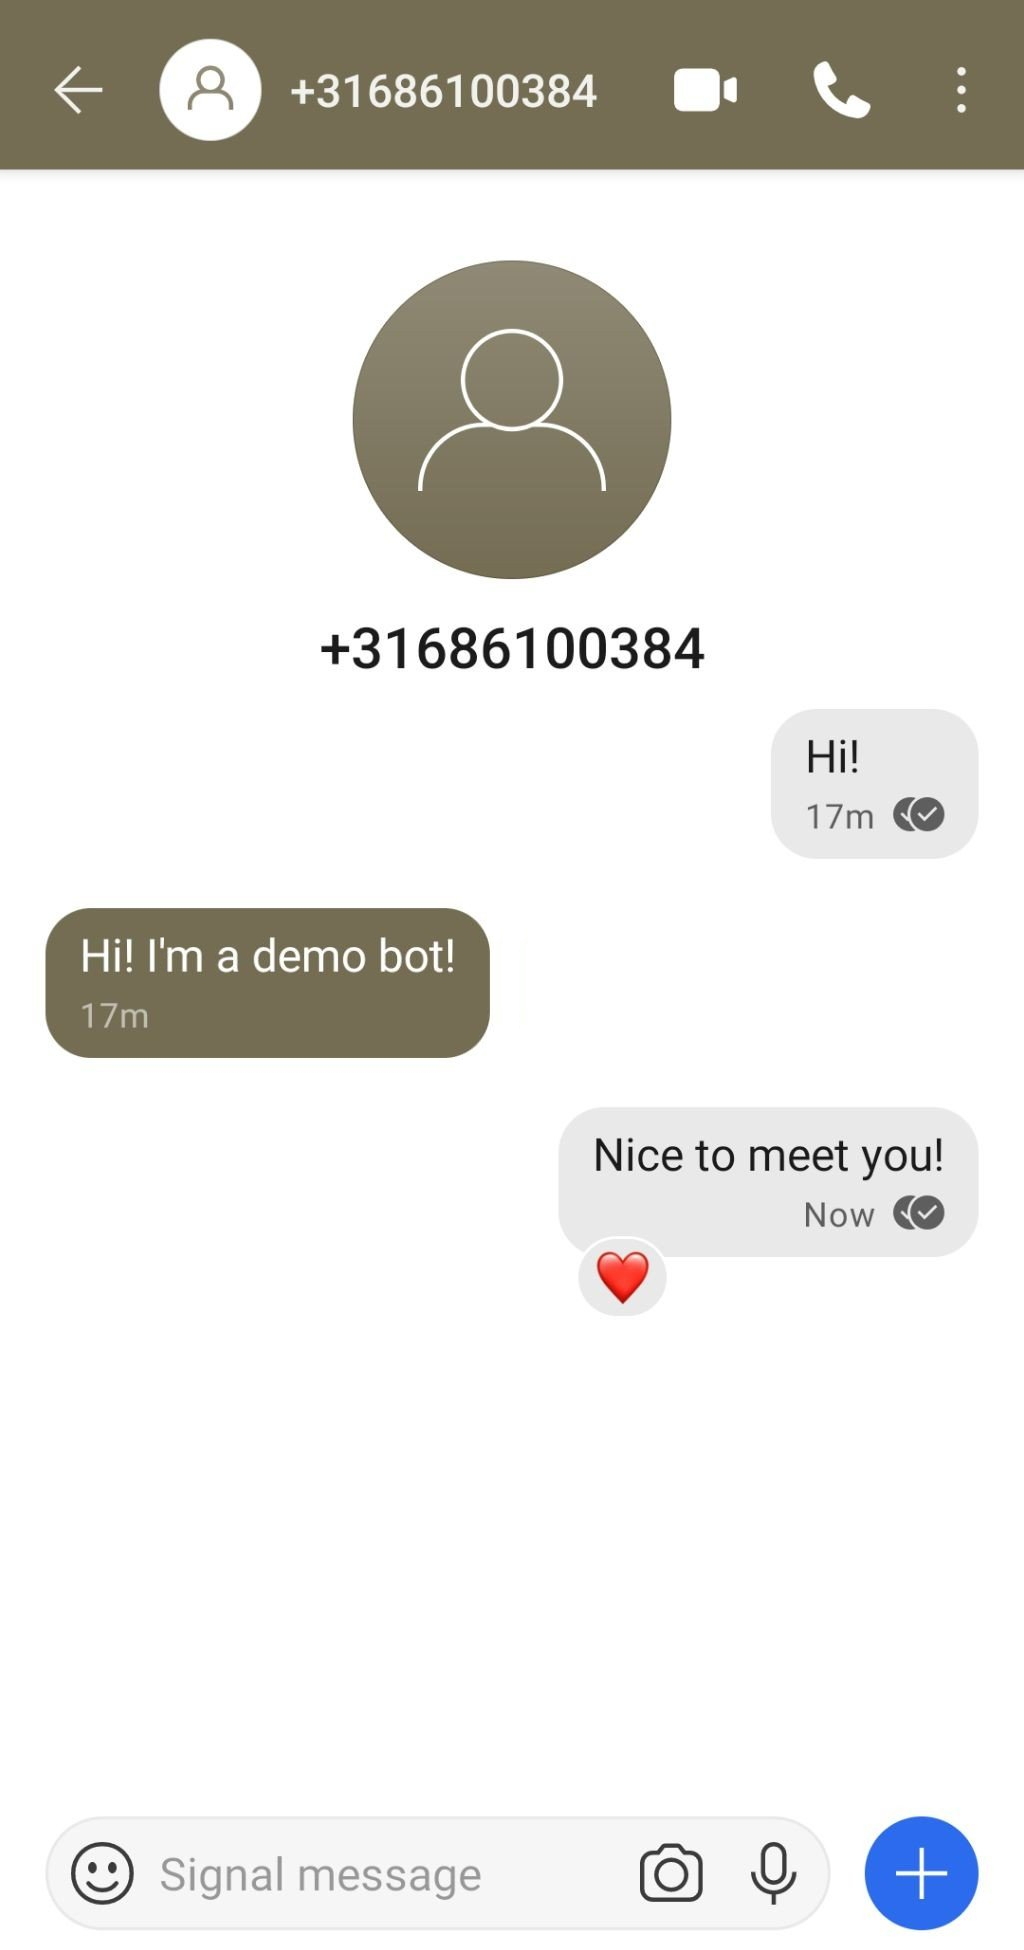 Conversation with demonstration bot